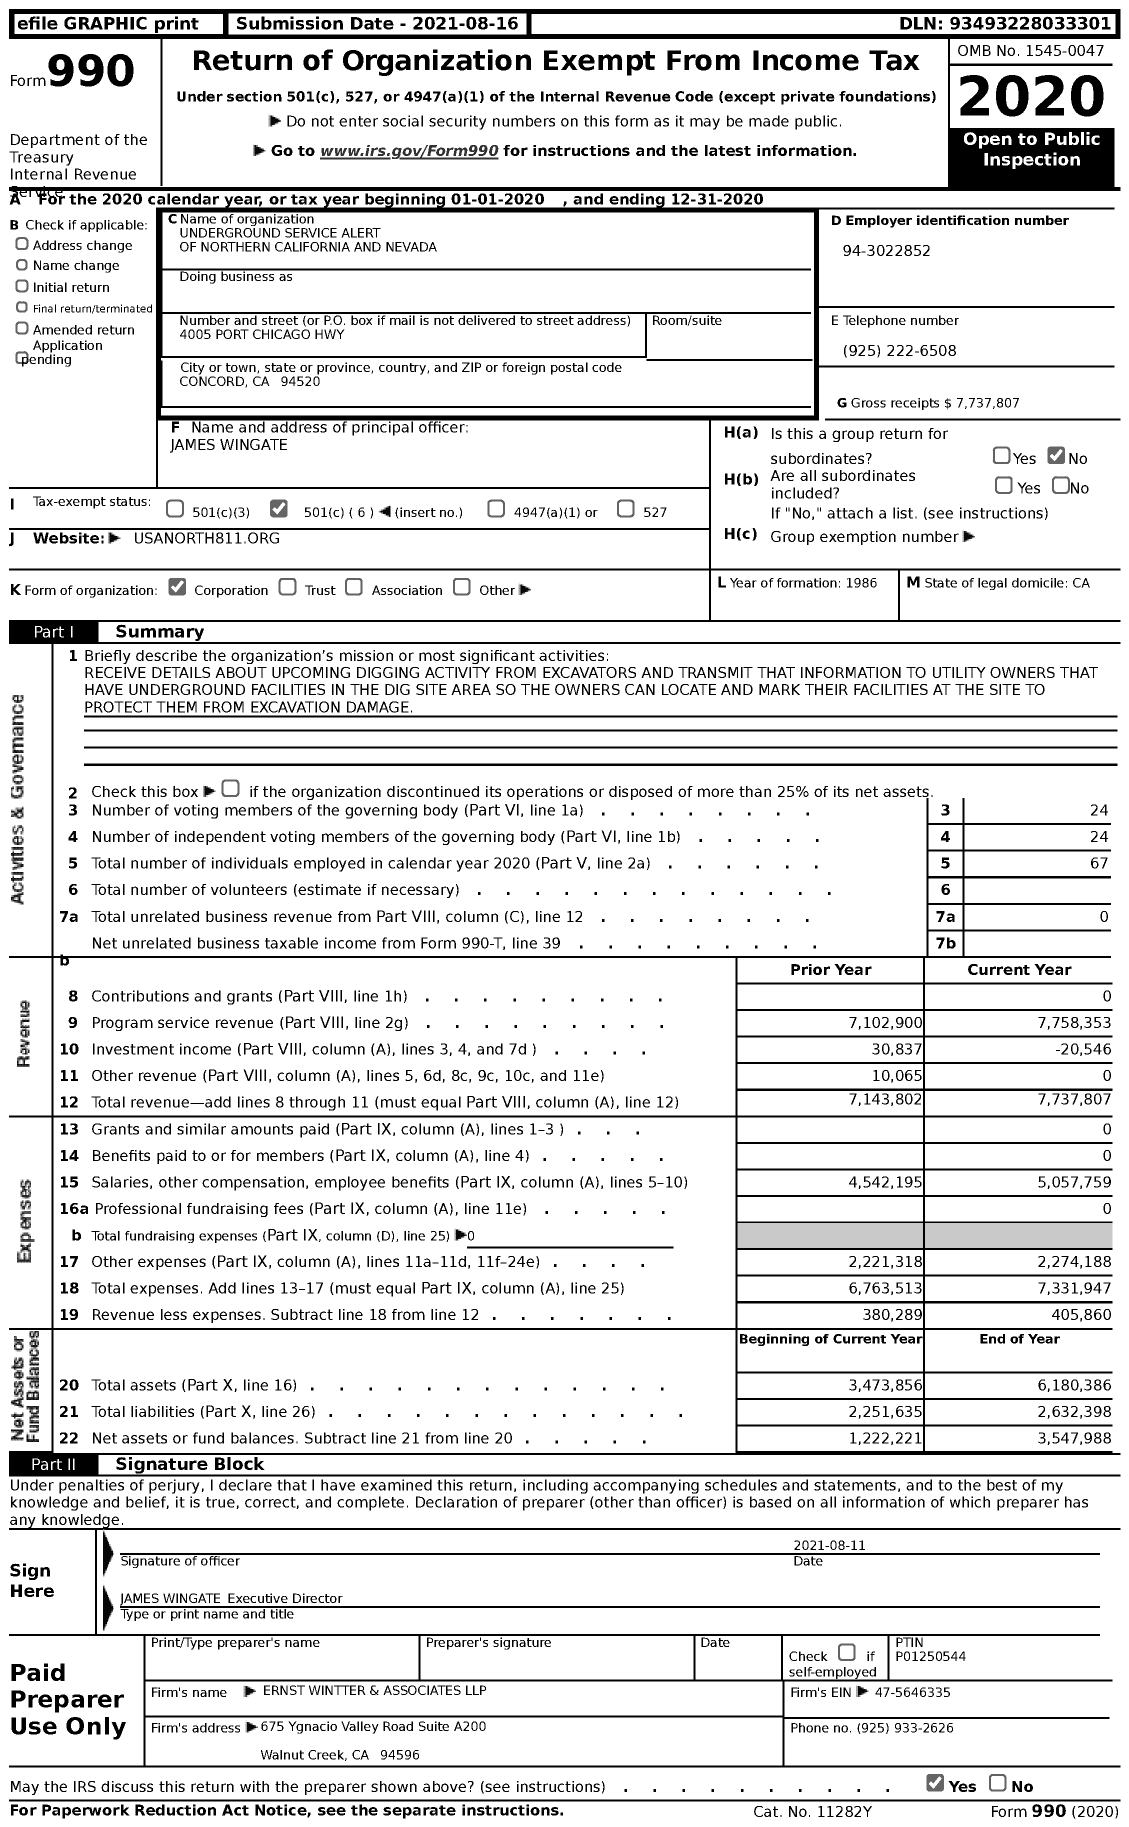 Image of first page of 2020 Form 990 for Underground Service Alert of Northern California and Nevada